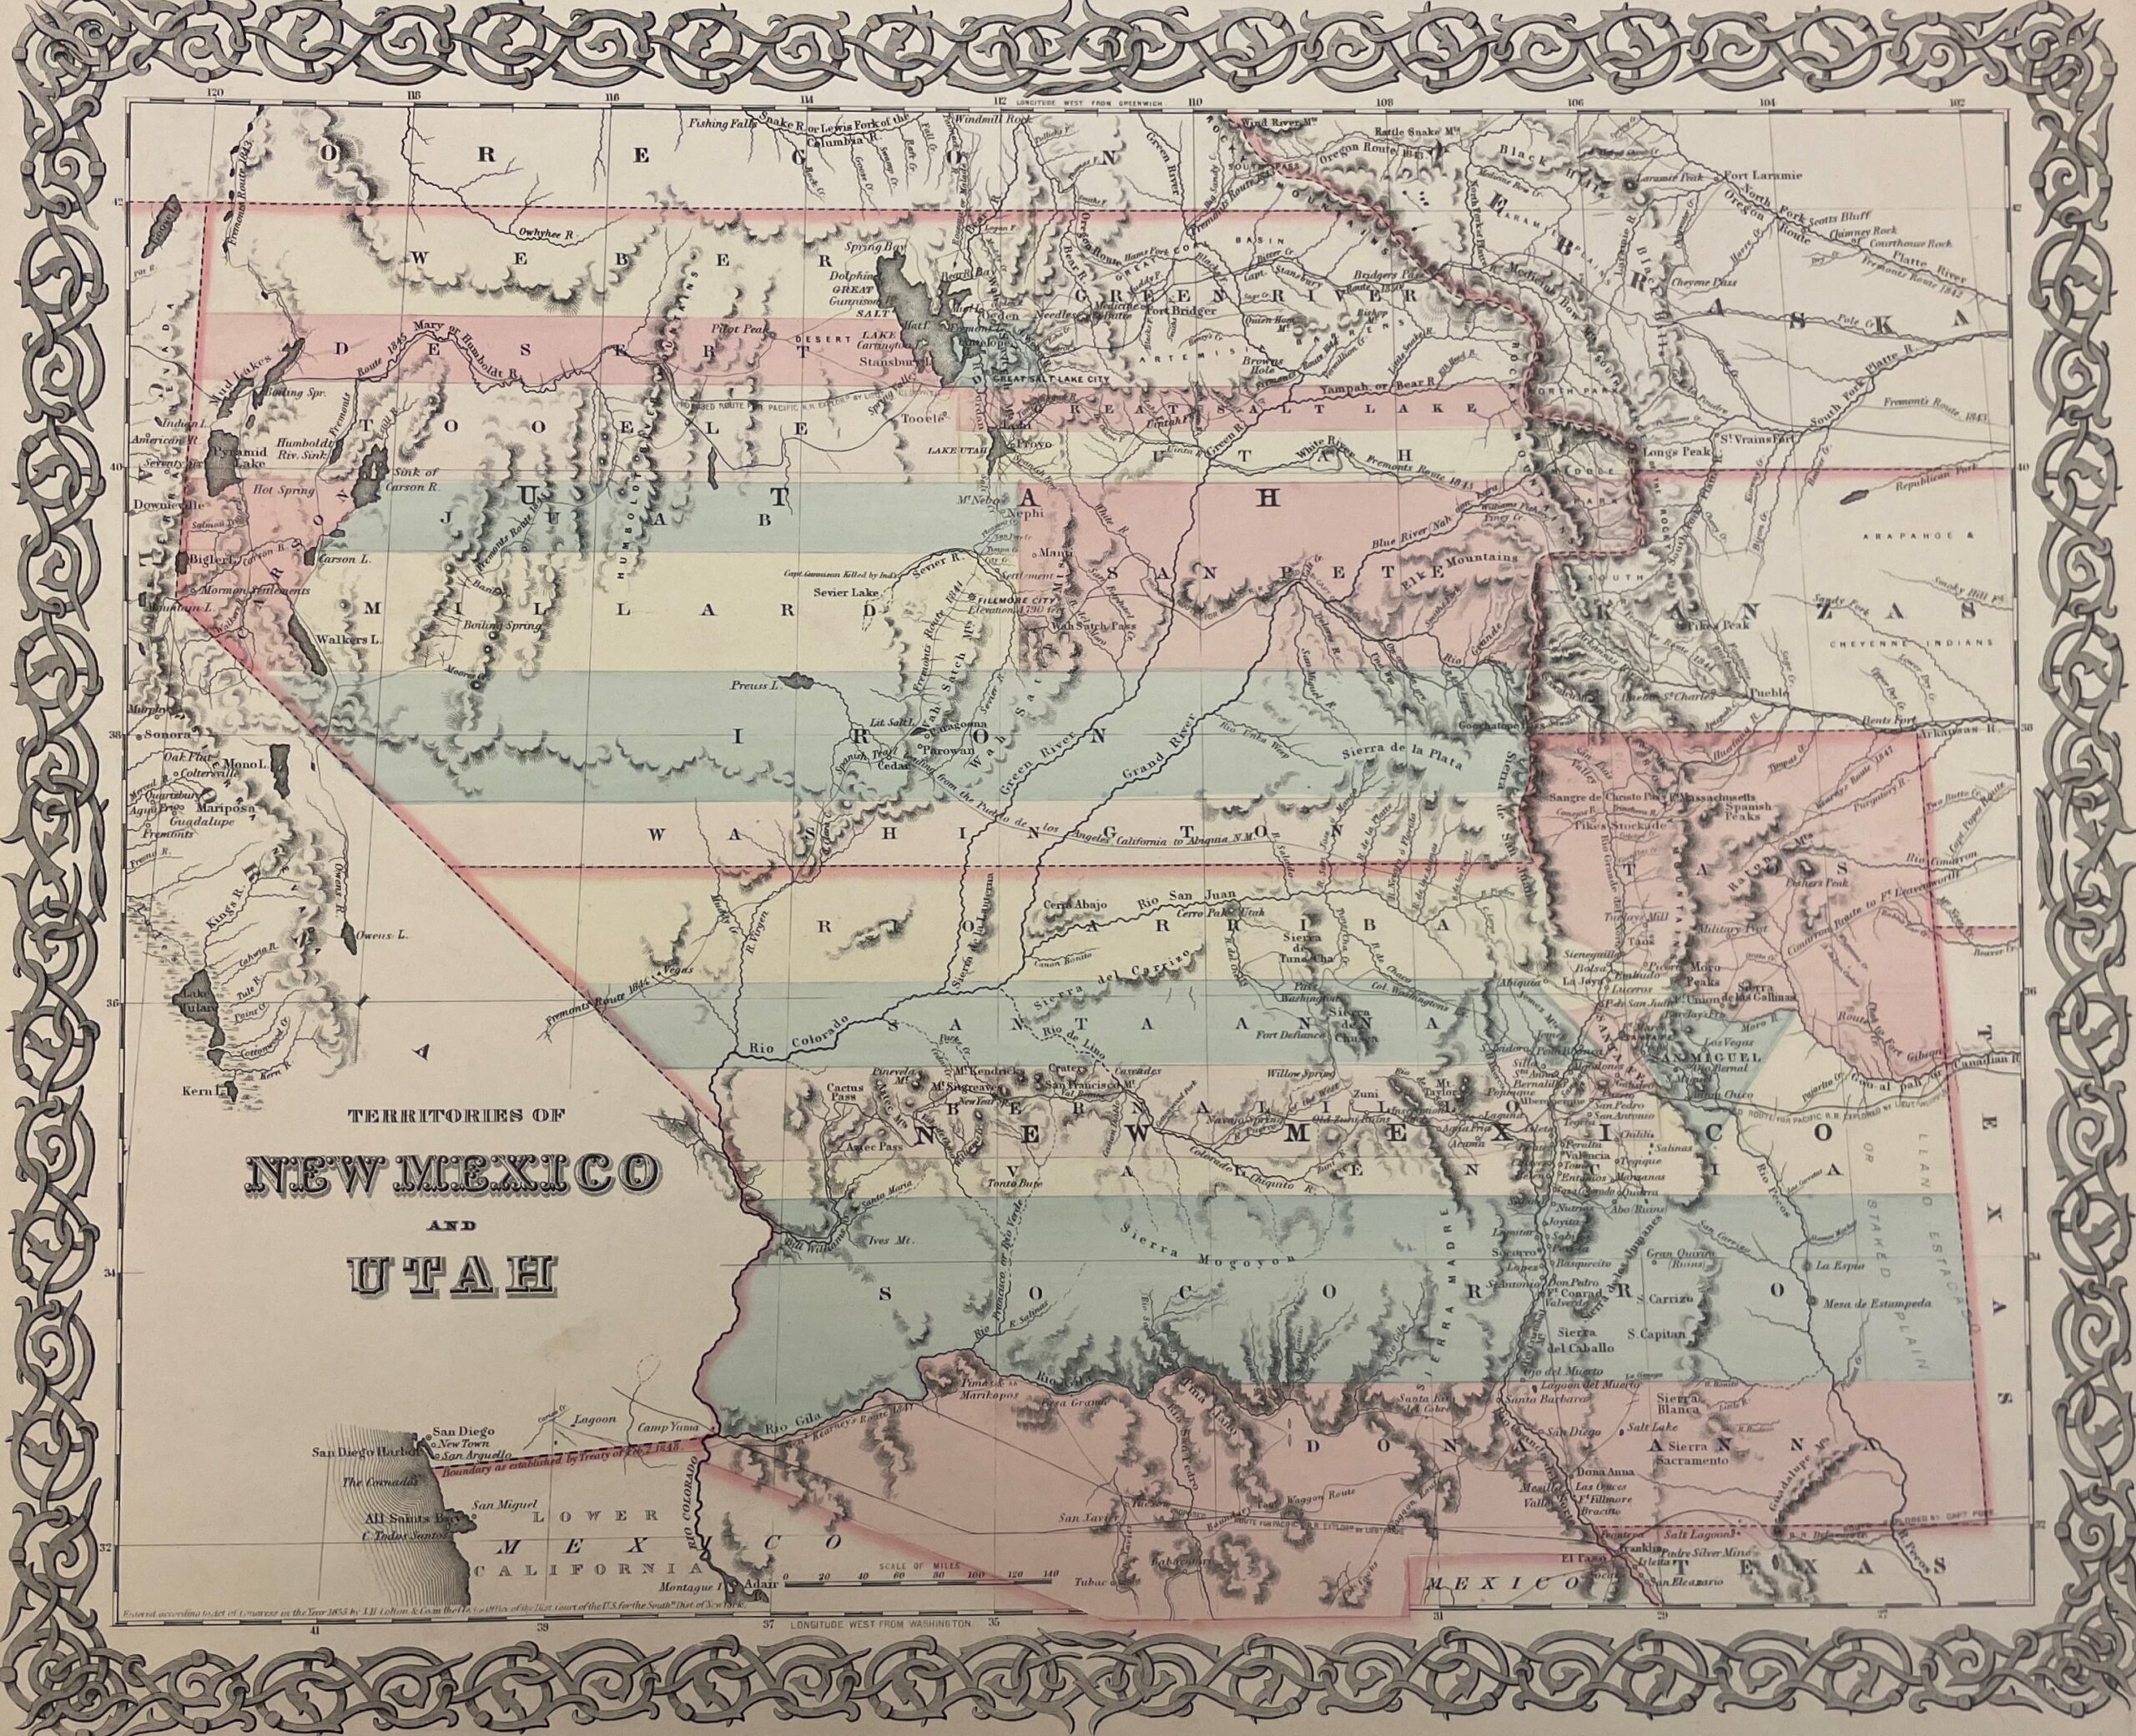 1855 Colton’s Territories of New Mexico and Utah Map